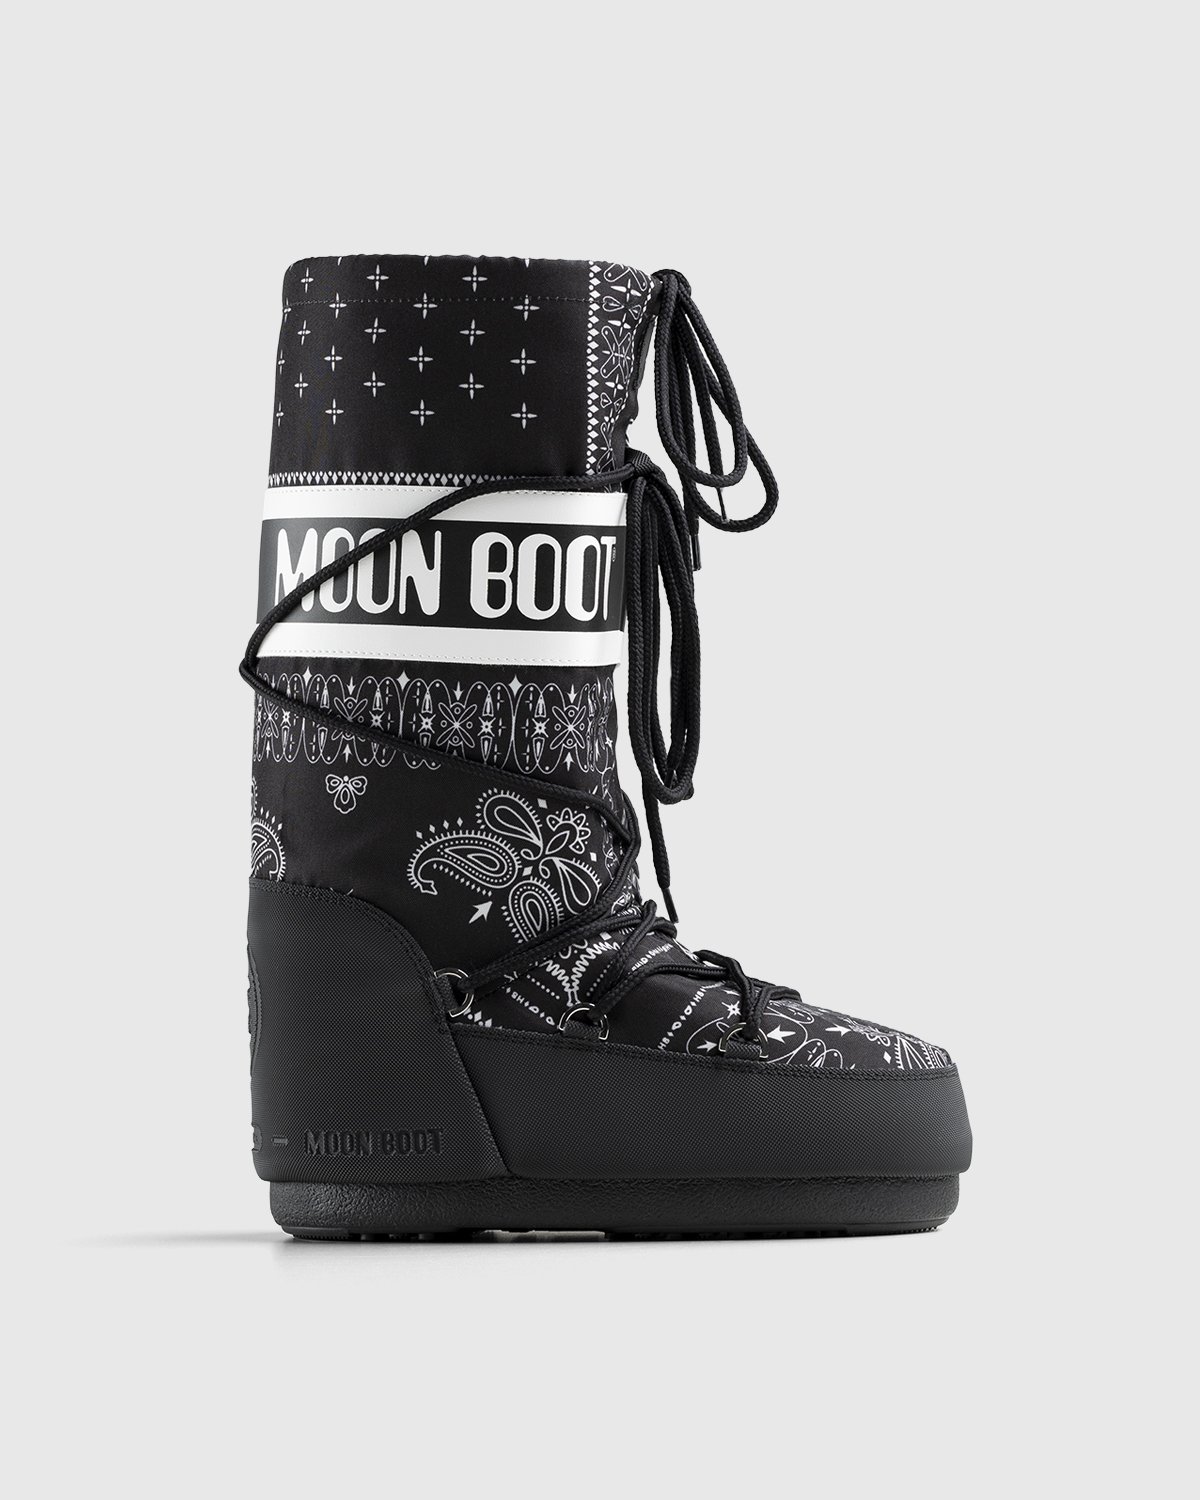 Moon Boot Black Classic Icon, Shoes